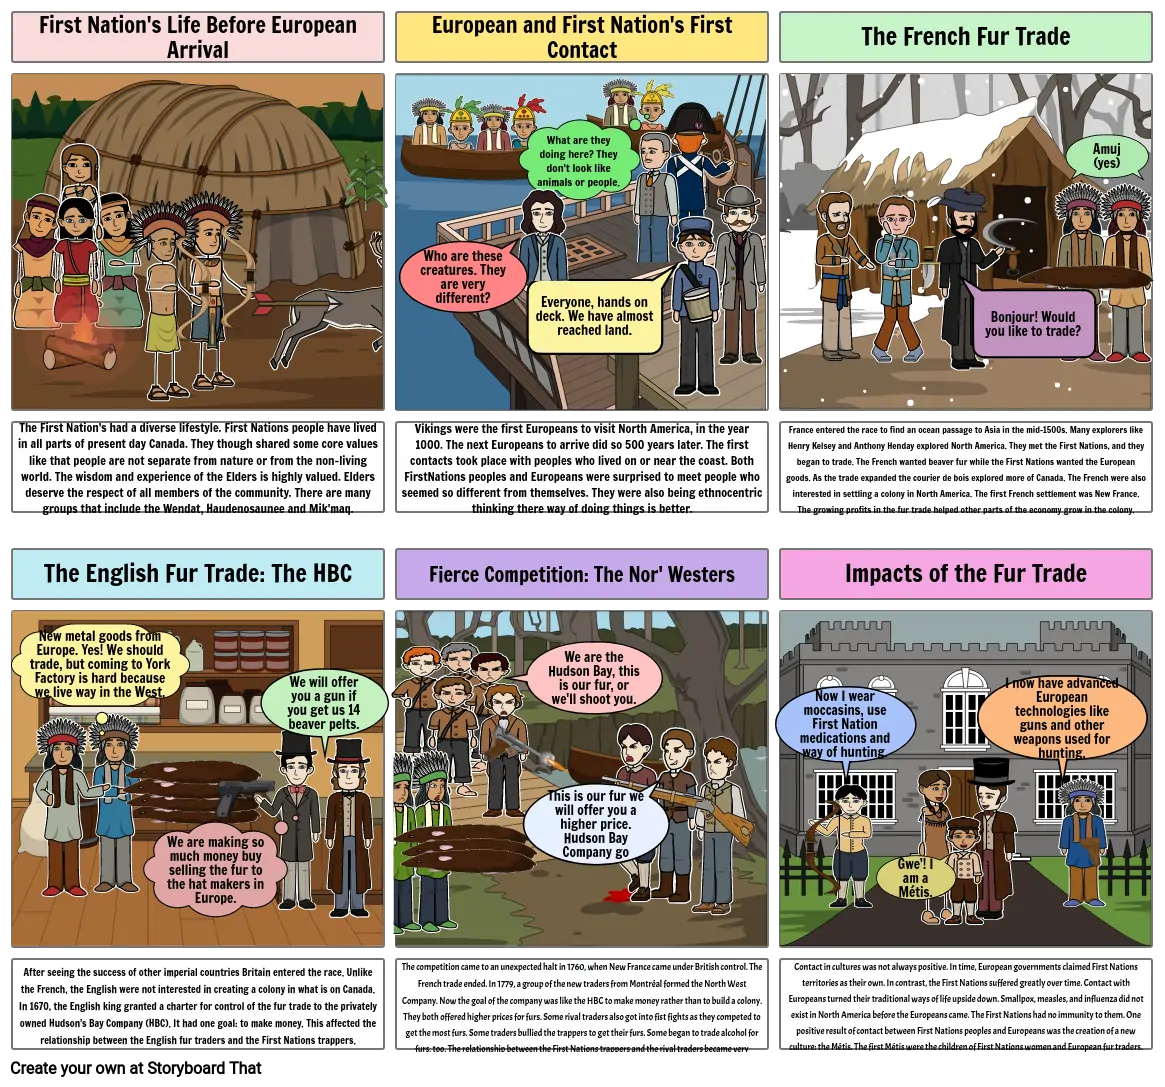 Social Studies: Interaction with Europeans and First Nations